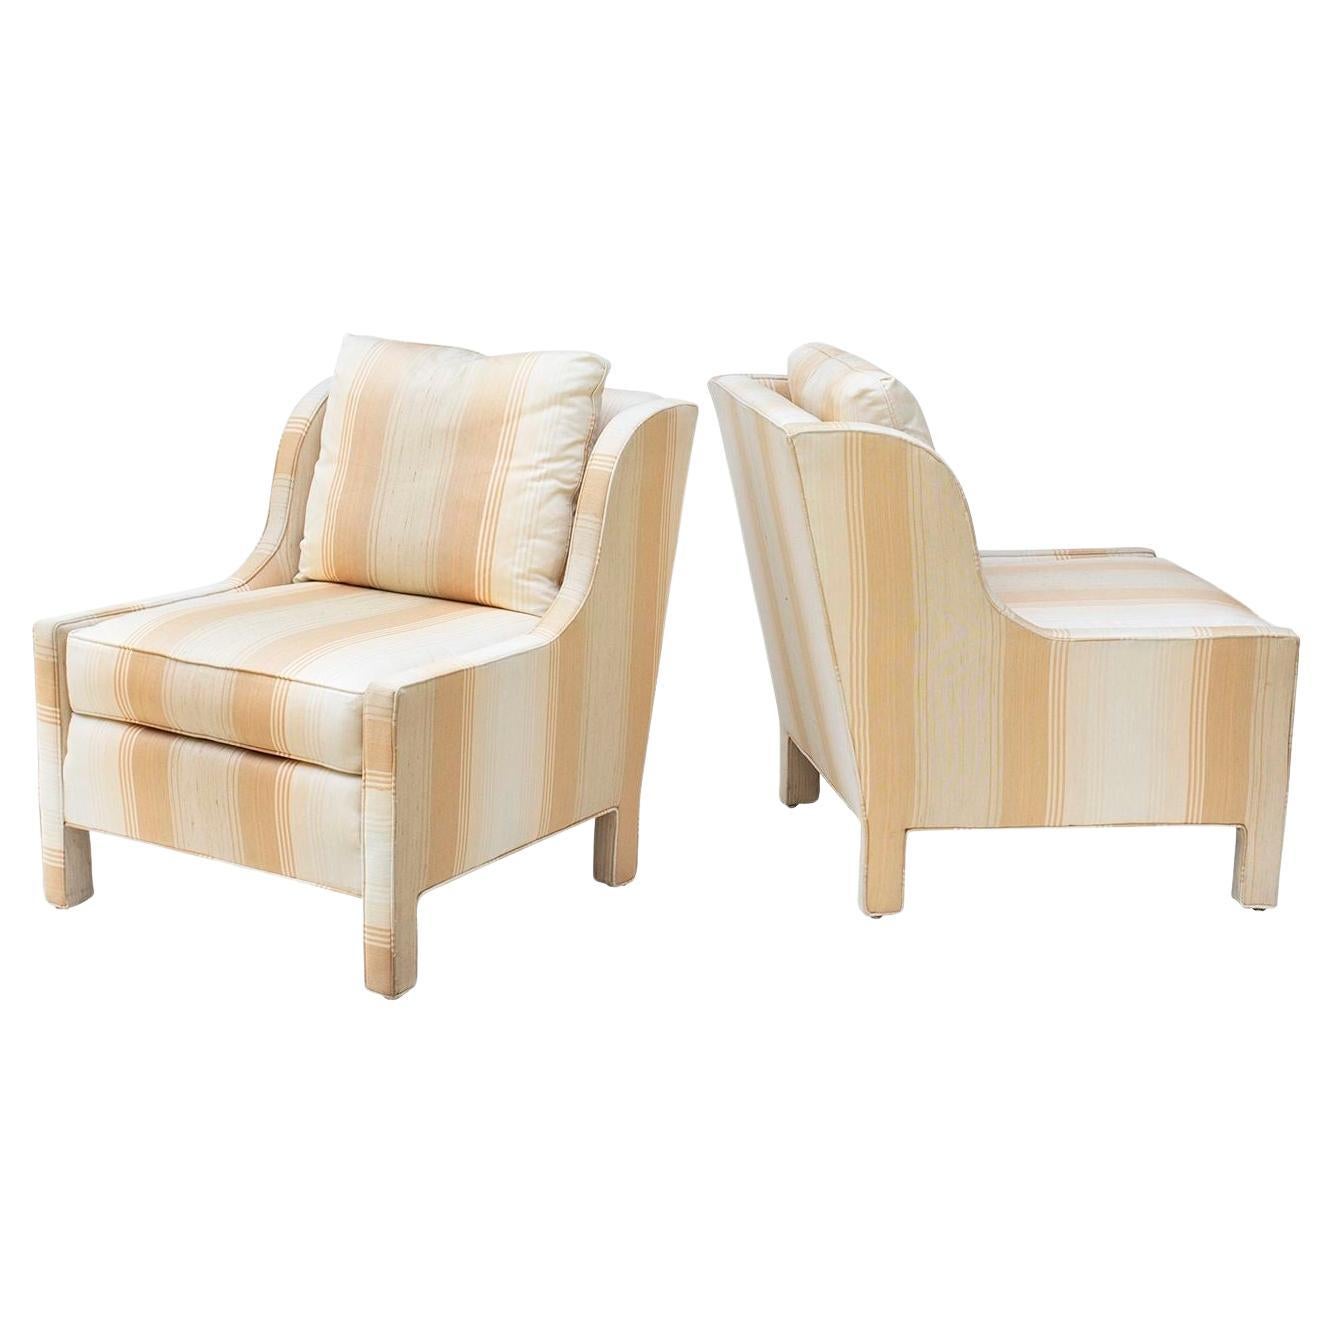 Pair of Peach Striped Parsons Style Wing Slipper Chairs with Curving Arms For Sale